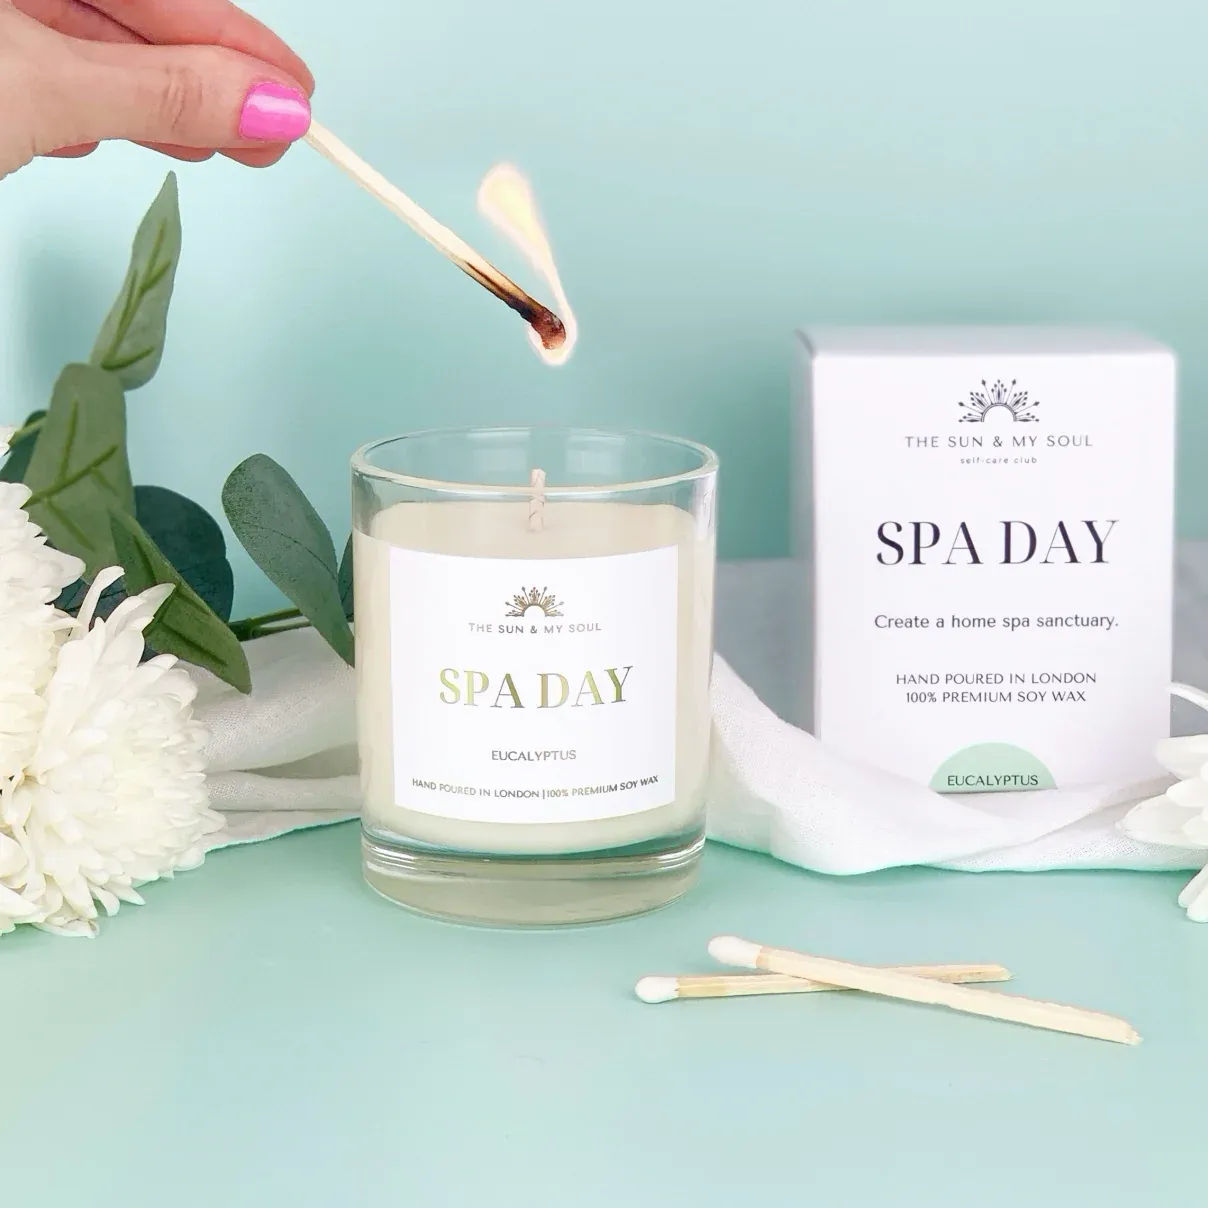 Spa Day - Eucalyptus Scented Premium Soy Wax Candle